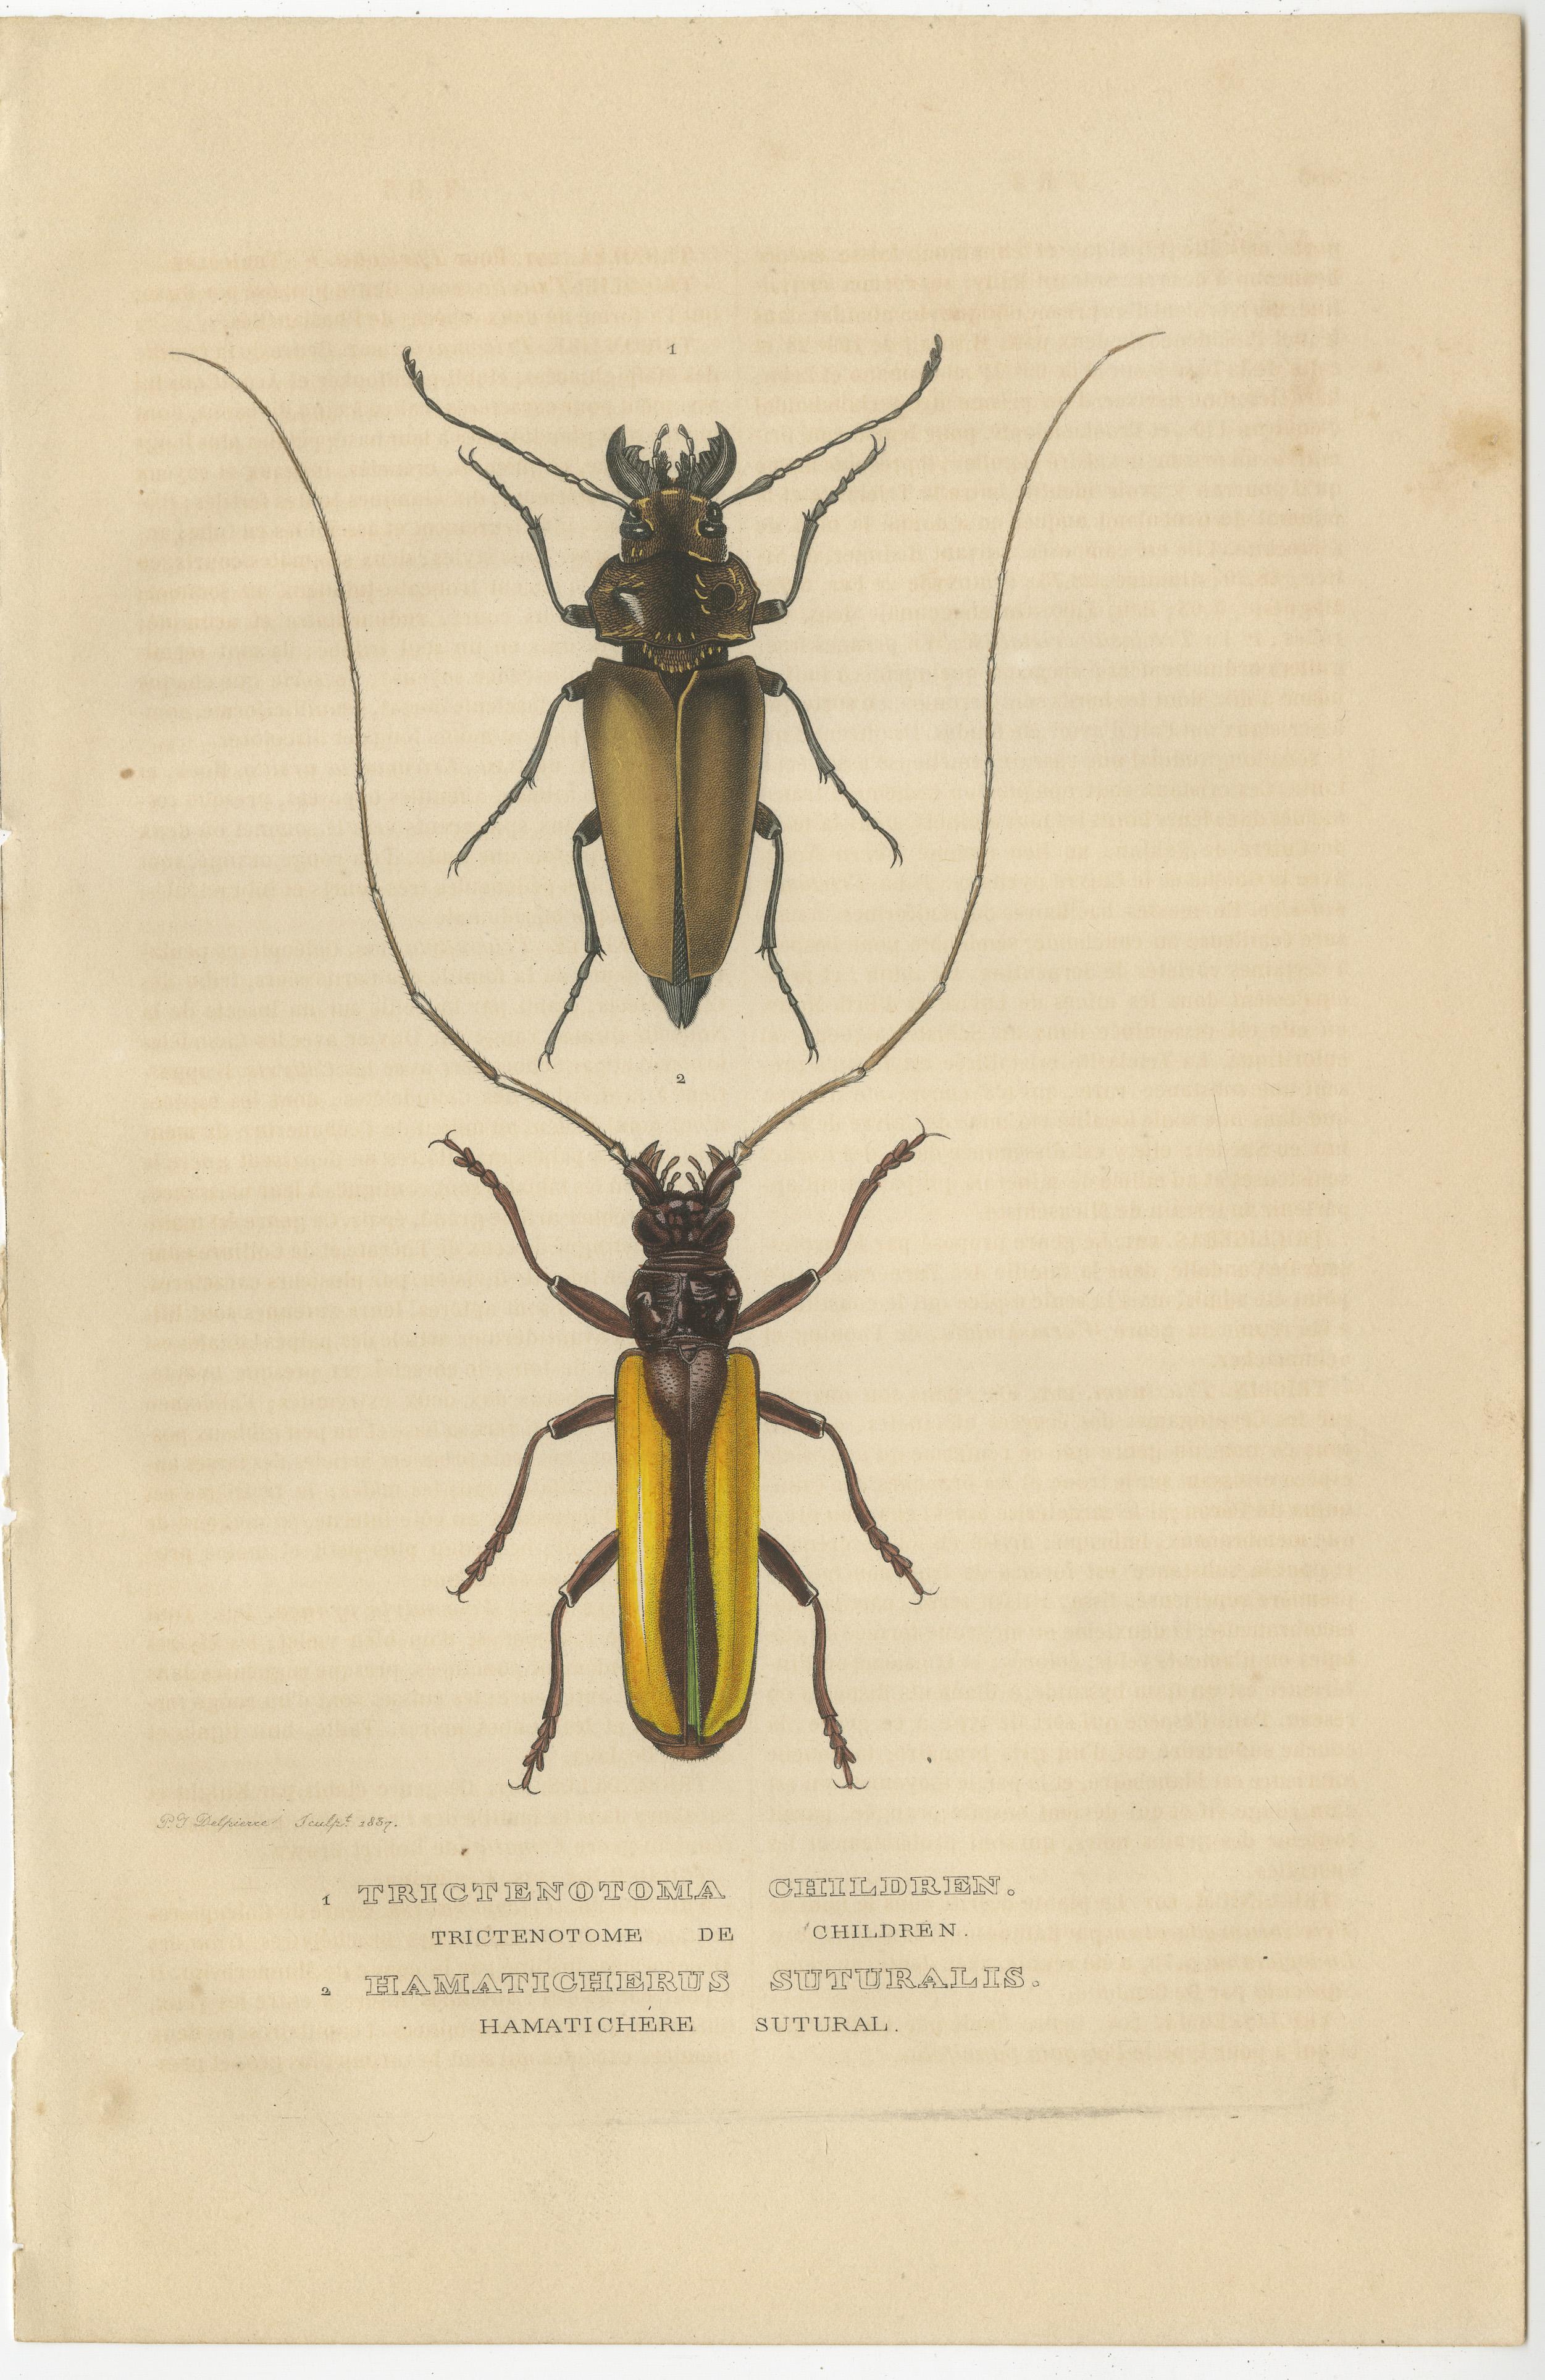 Engraved Exquisite 1845 Handcolored Beetle Engravings: A Duo of Entomological Elegance